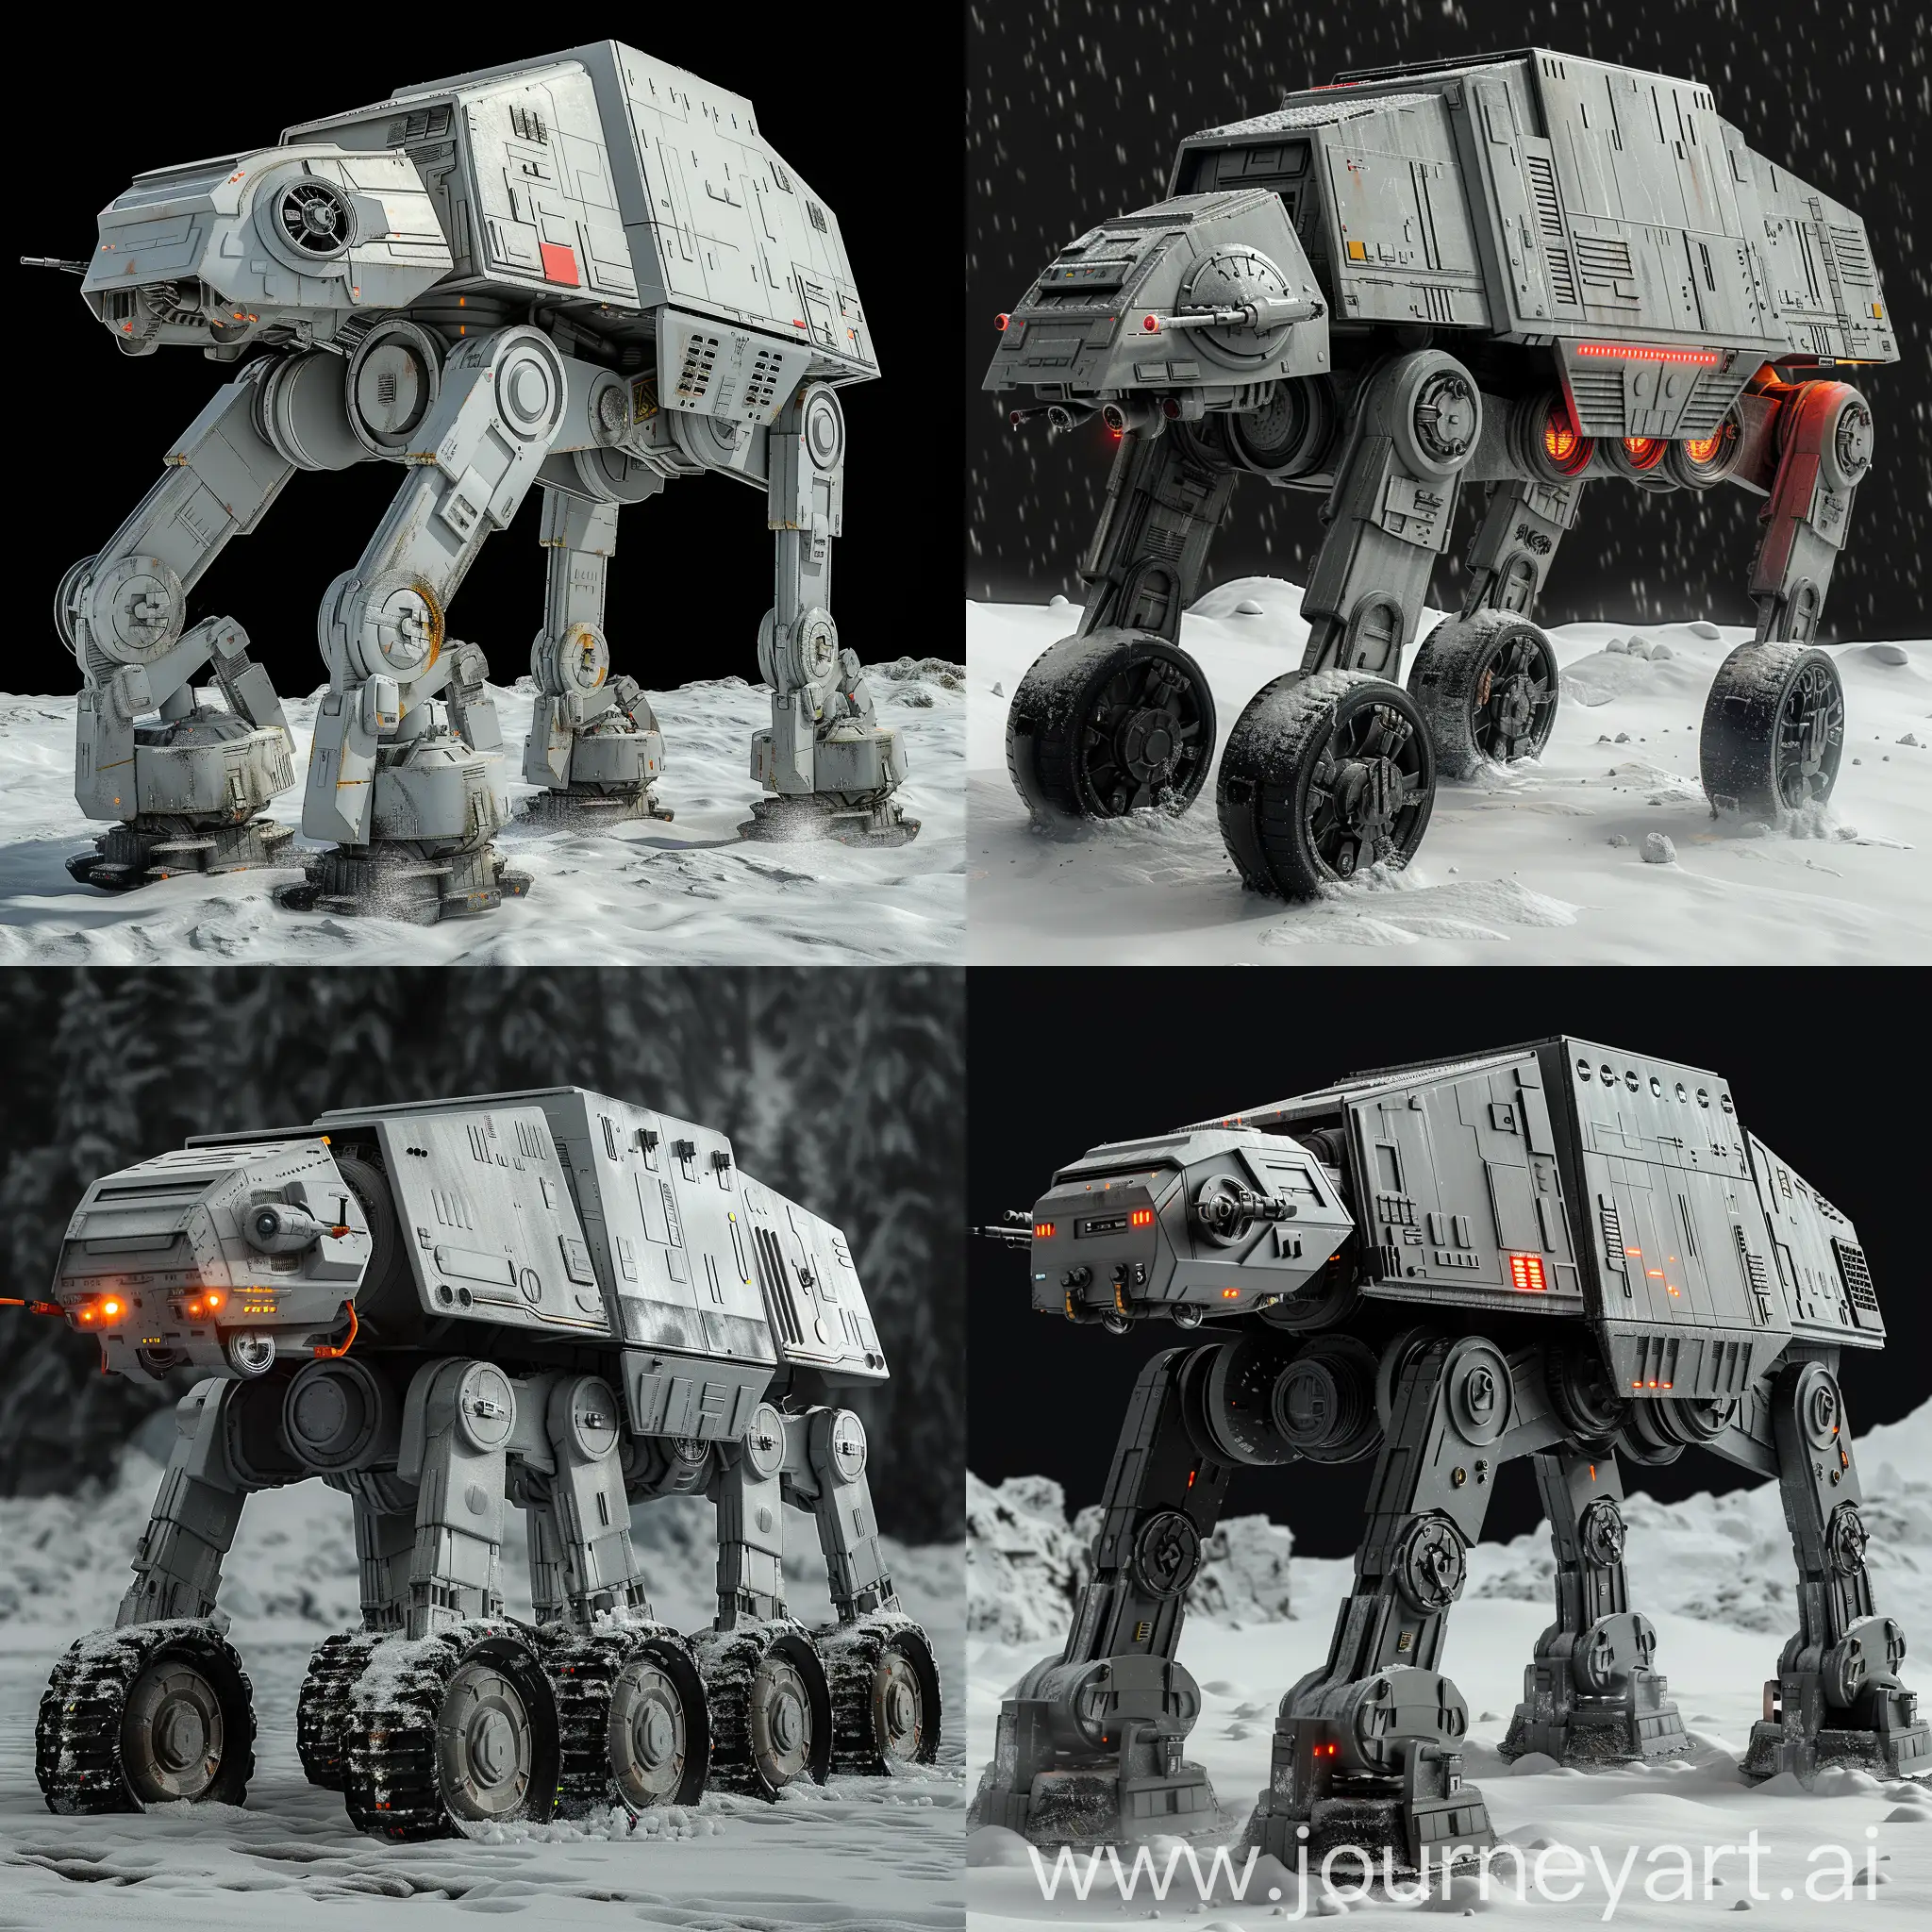 Futuristic Star Wars All Terrain Armored Transport https://static.wikia.nocookie.net/starwars/images/1/16/AT-AT_2_Fathead.png/revision/latest/scale-to-width-down/1200?cb=20161108042721, Electric Power, Solar Panels, Regenerative Braking, Lightweight Materials, Energy-Efficient Systems, Recycled Materials, Water Recycling System, Aerodynamic Design, Efficient Tire Design, Biodegradable Lubricants, Advanced AI Integration, Holographic Displays, Stealth Technology, Advanced Weapon Systems, Adaptive Camouflage, Energy Shielding, Enhanced Sensor Suite, Drone Deployment System, Self-Repairing Systems, Virtual Reality Training Simulators, Droid Companion Bay, Holoprojector, Multi-Function Control Panel, Cloaking Device, Graviton Beam Projector, Infrared Night Vision, Stealth Repulsorlift System, Magnetic Tractor Beam, Advanced Communication Array, Emergency Escape Pod, octane render --stylize 1000